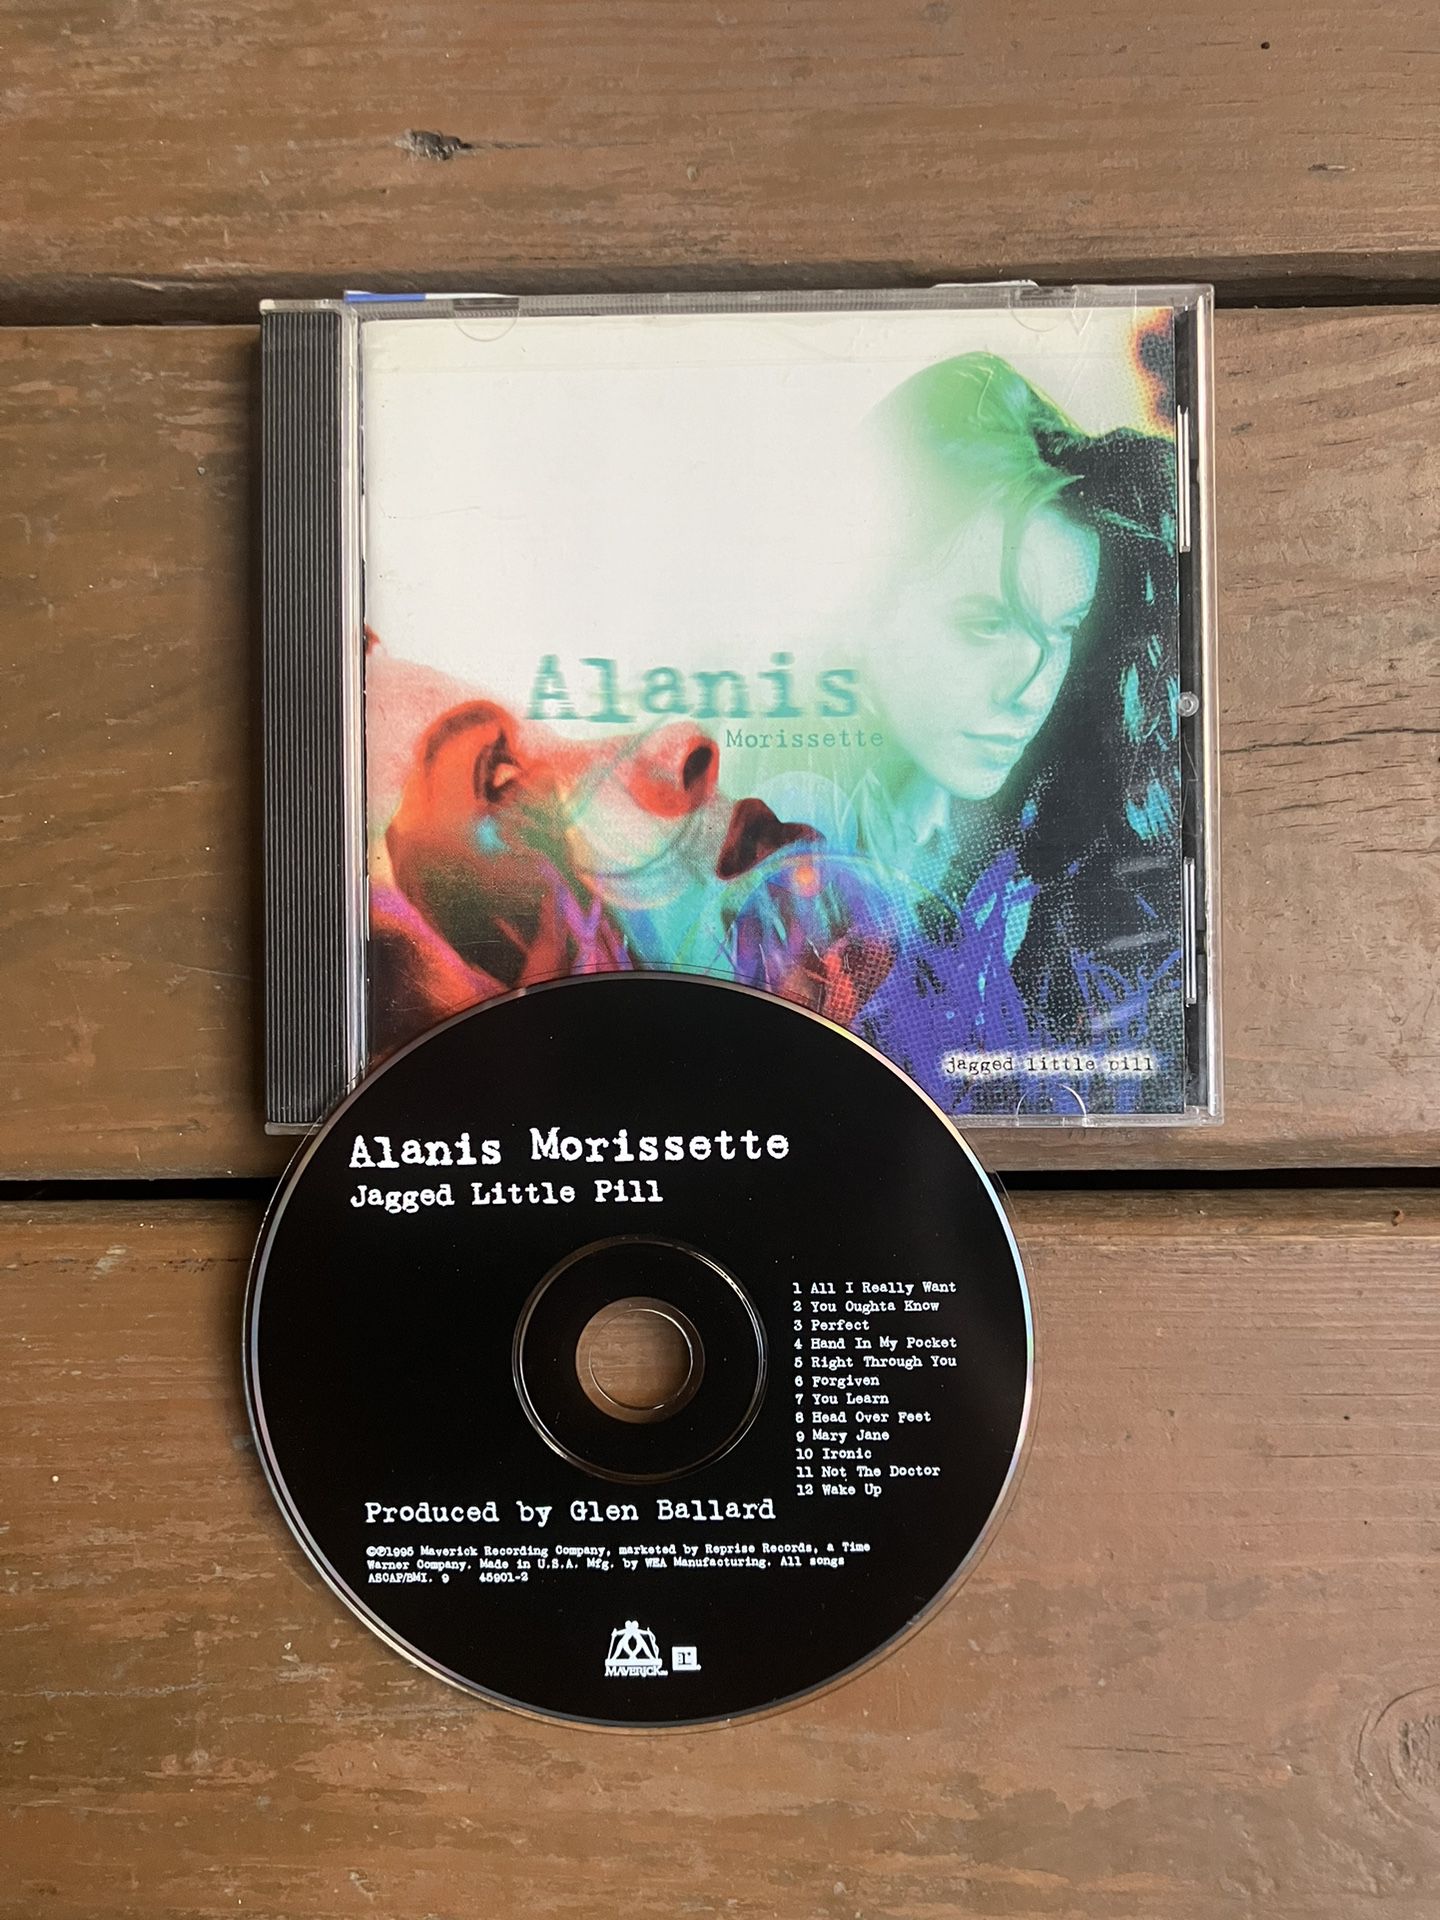 Alanis Morissette - Jagged Little Pill CD + 16 Page Lyric Booklet